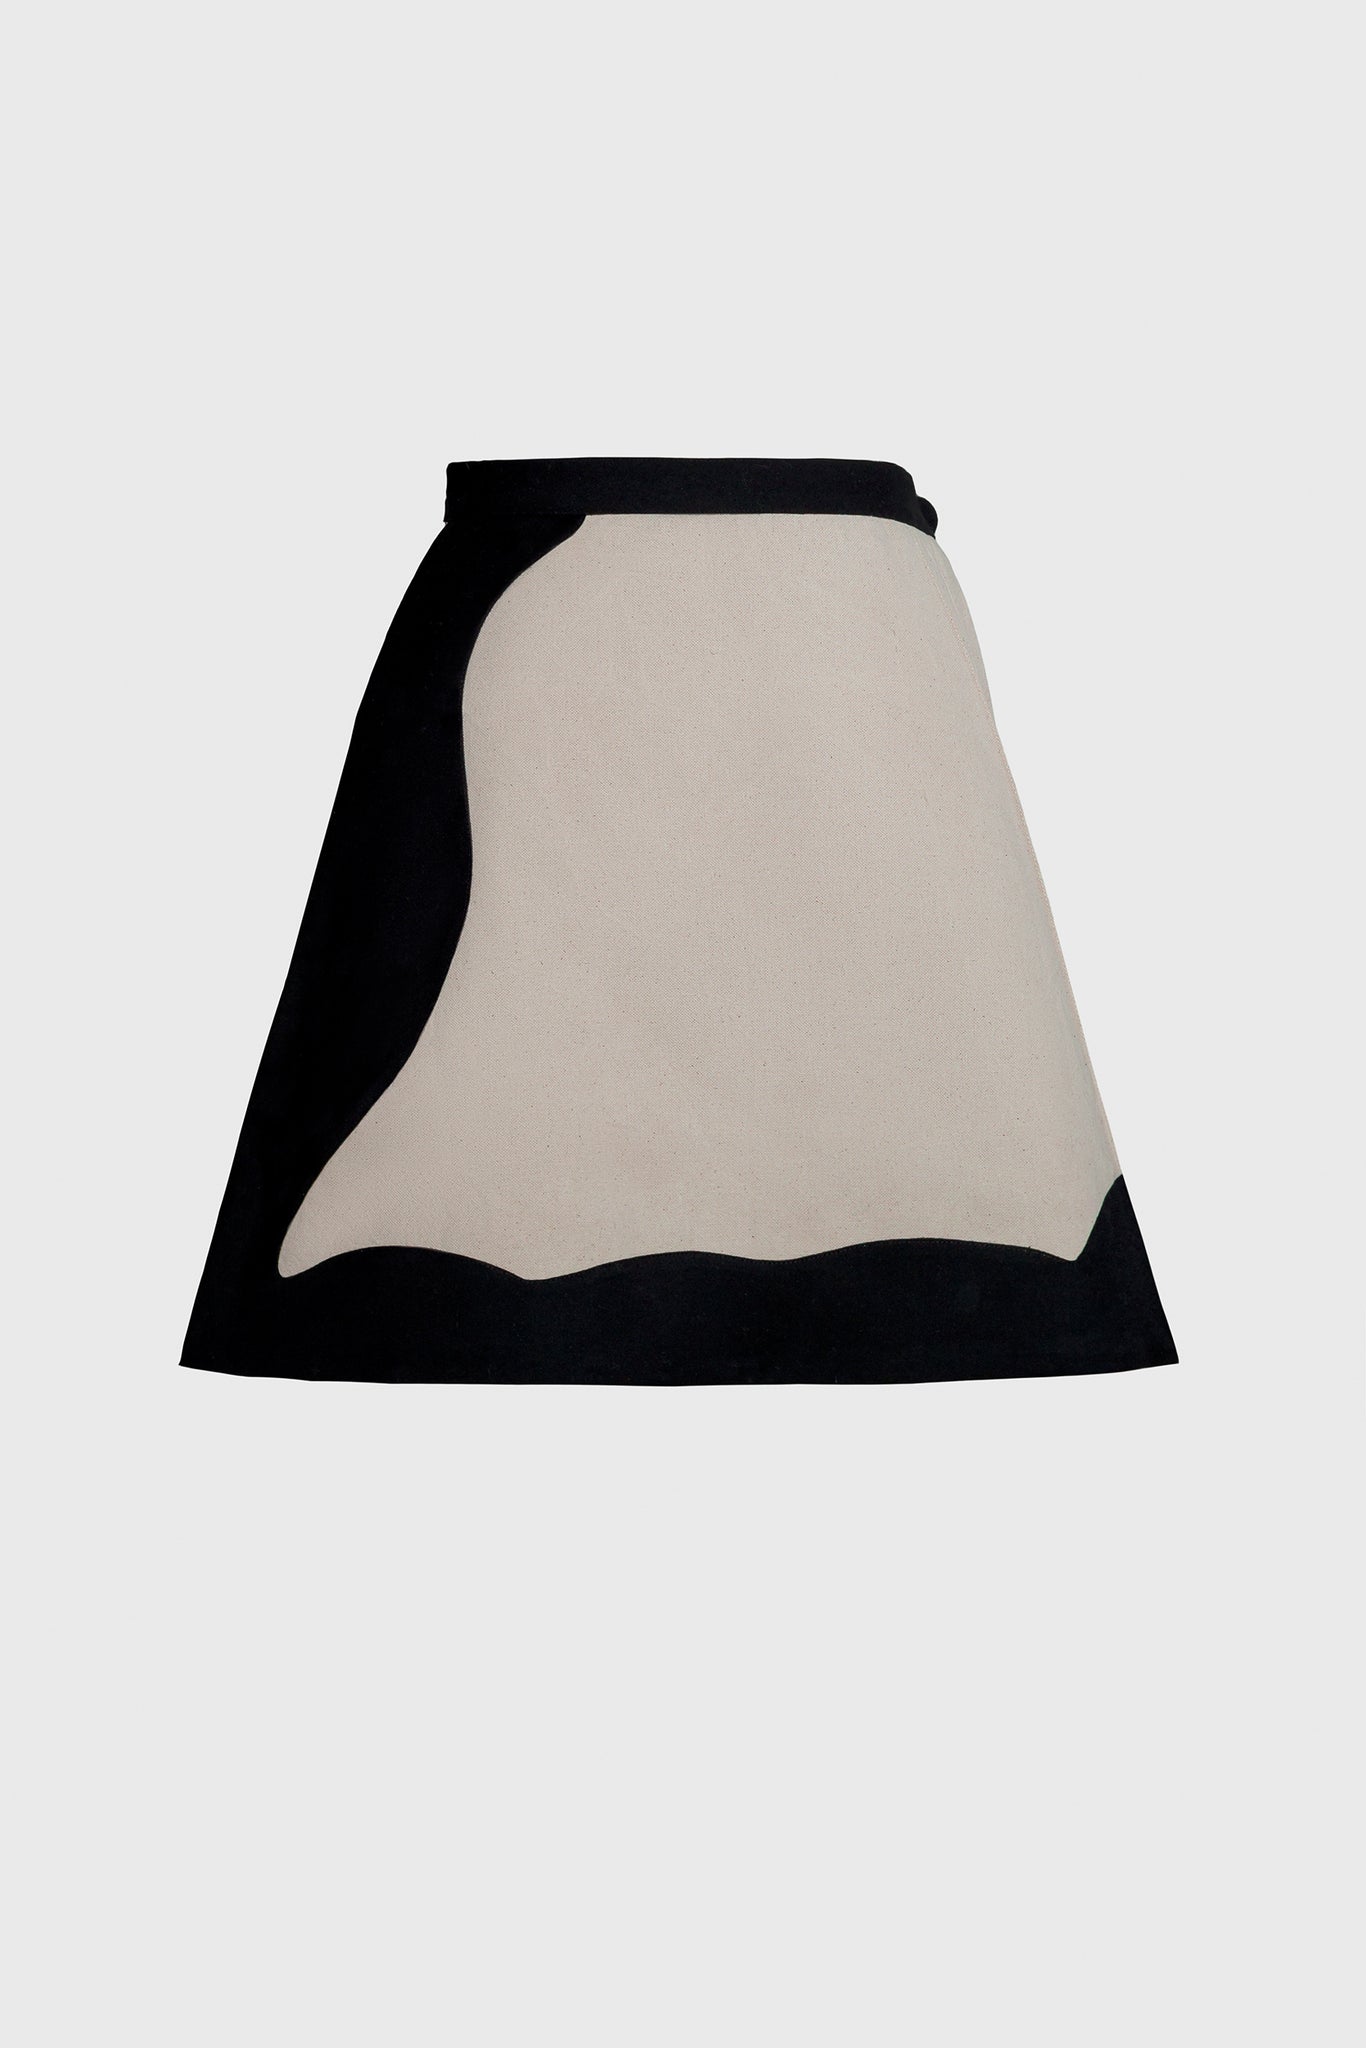 Ruxandra women's avantgarde skirt with side pleats, youthful, playful, wavy insert of black patch, wool and cotton, breaking silhouette, easy to wear with a shirt or a jacket